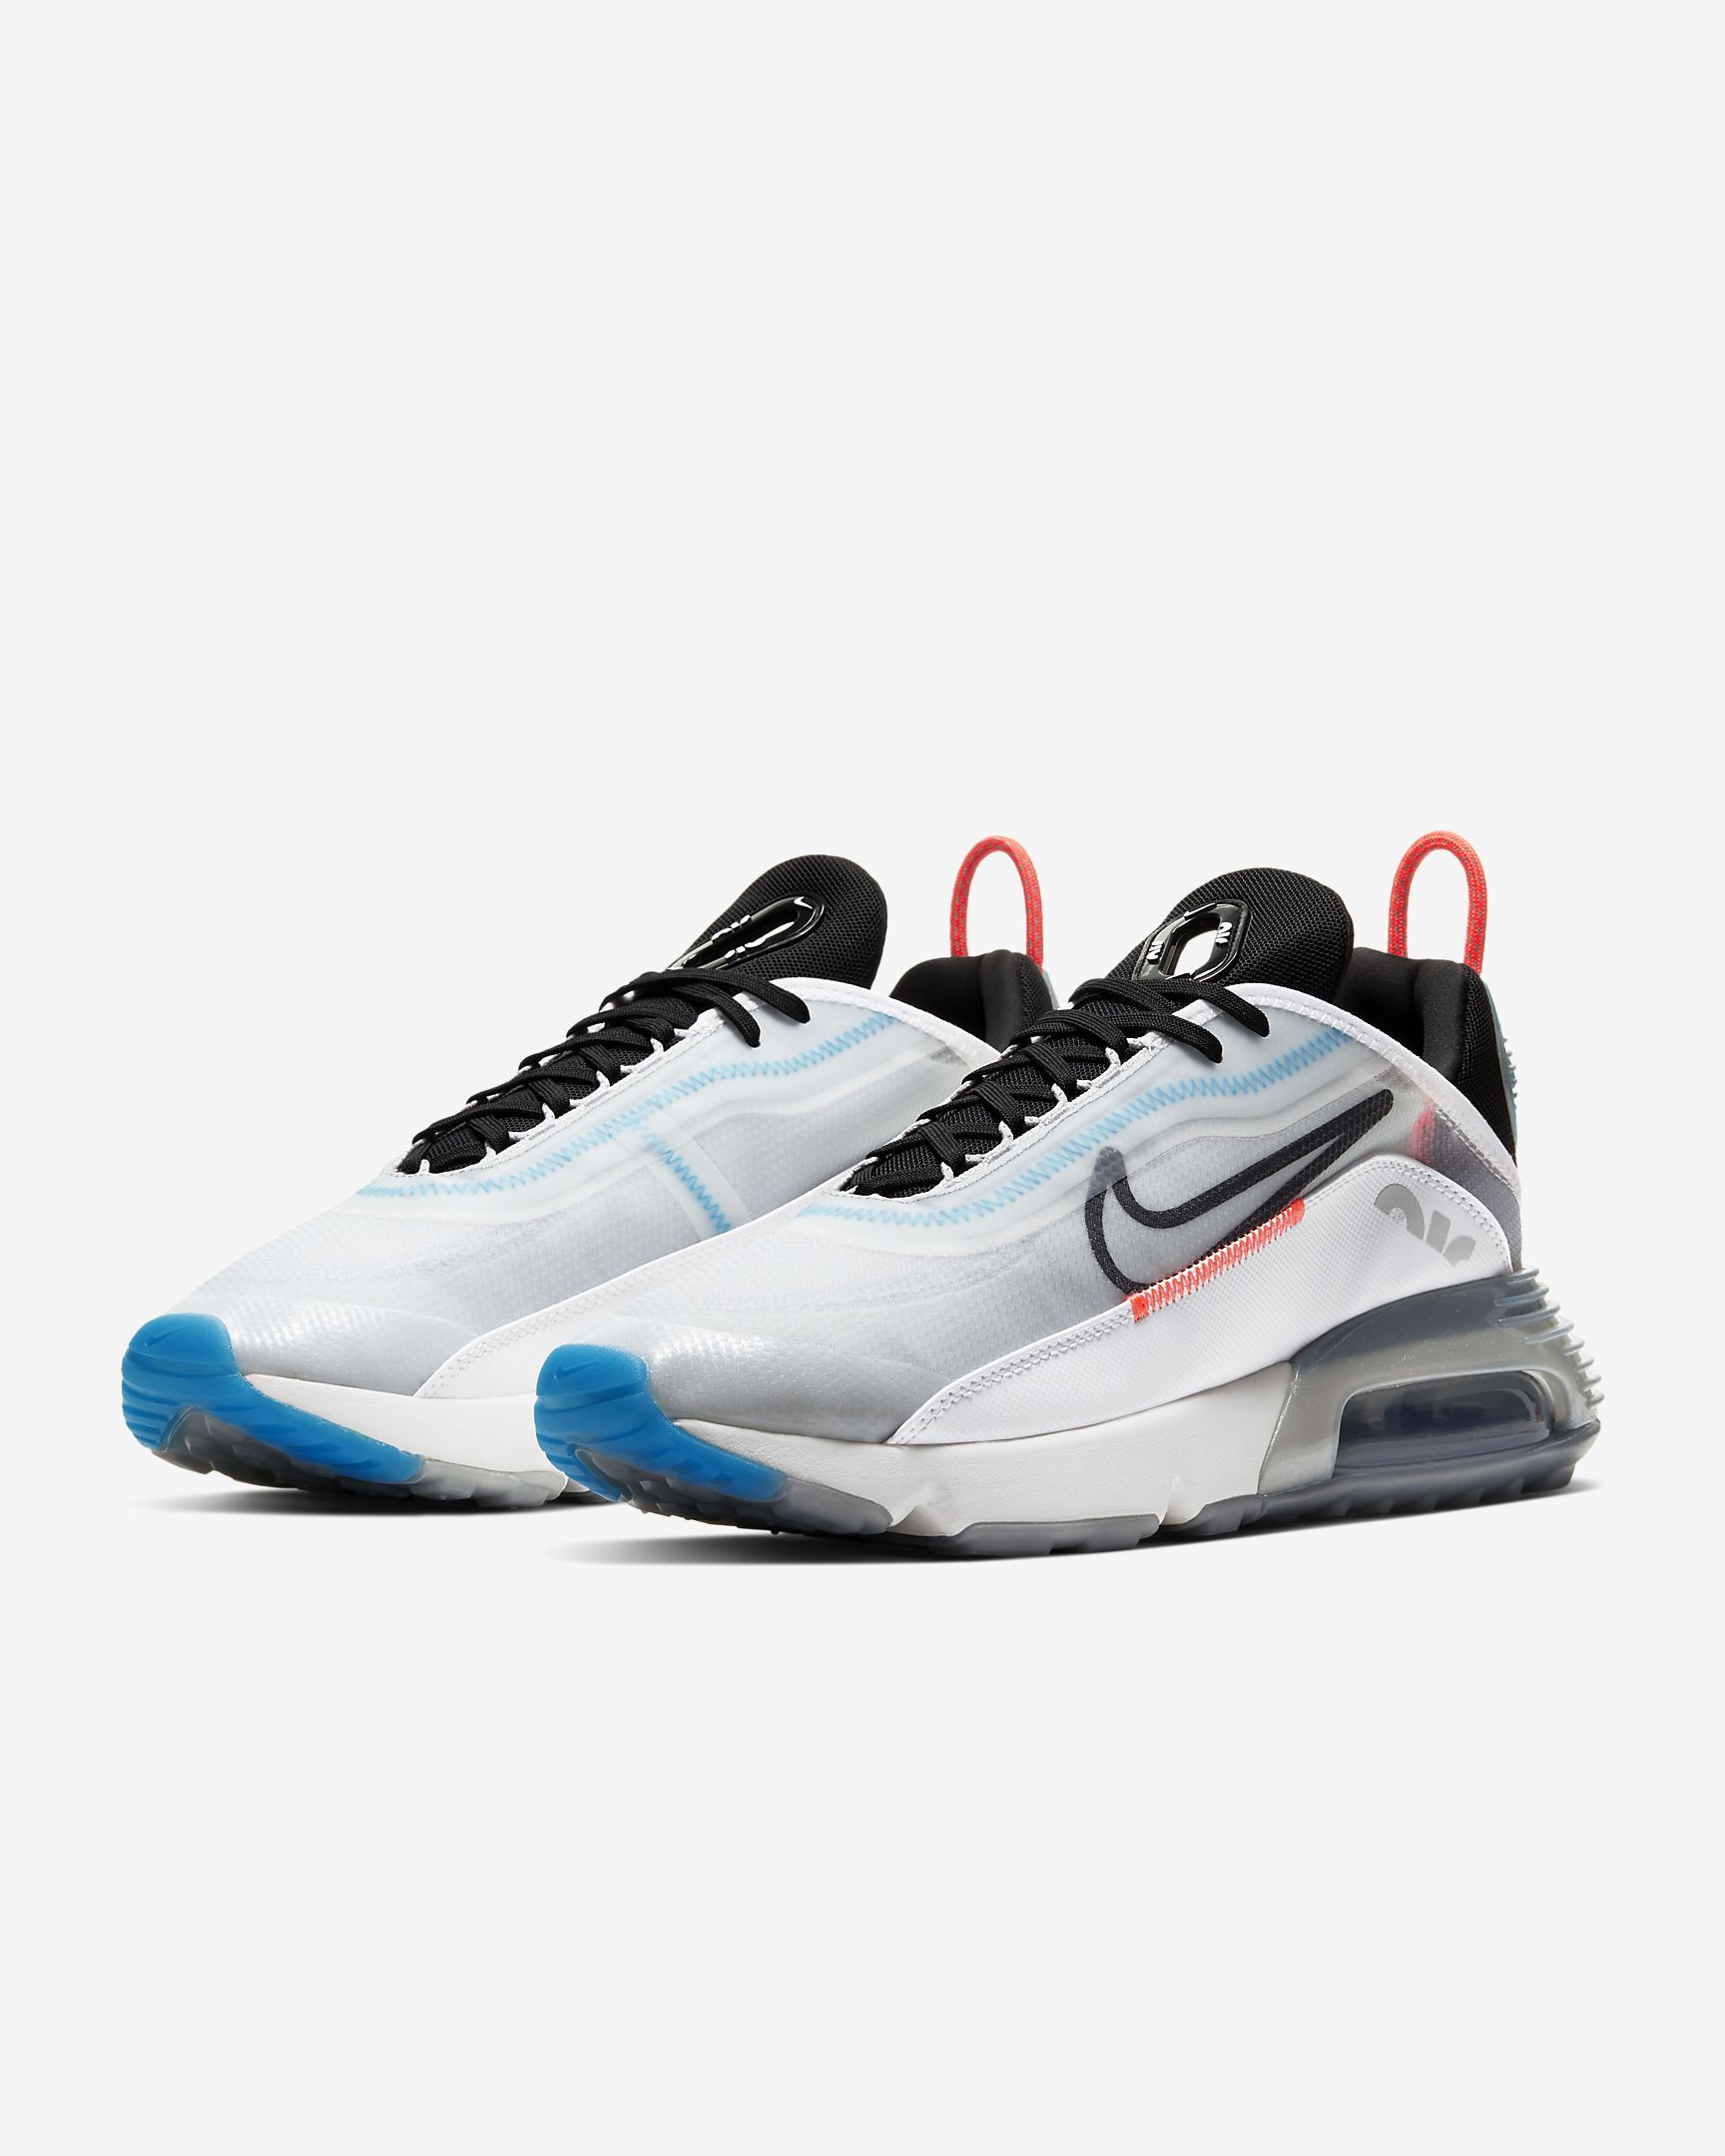 air max day 2020 goat